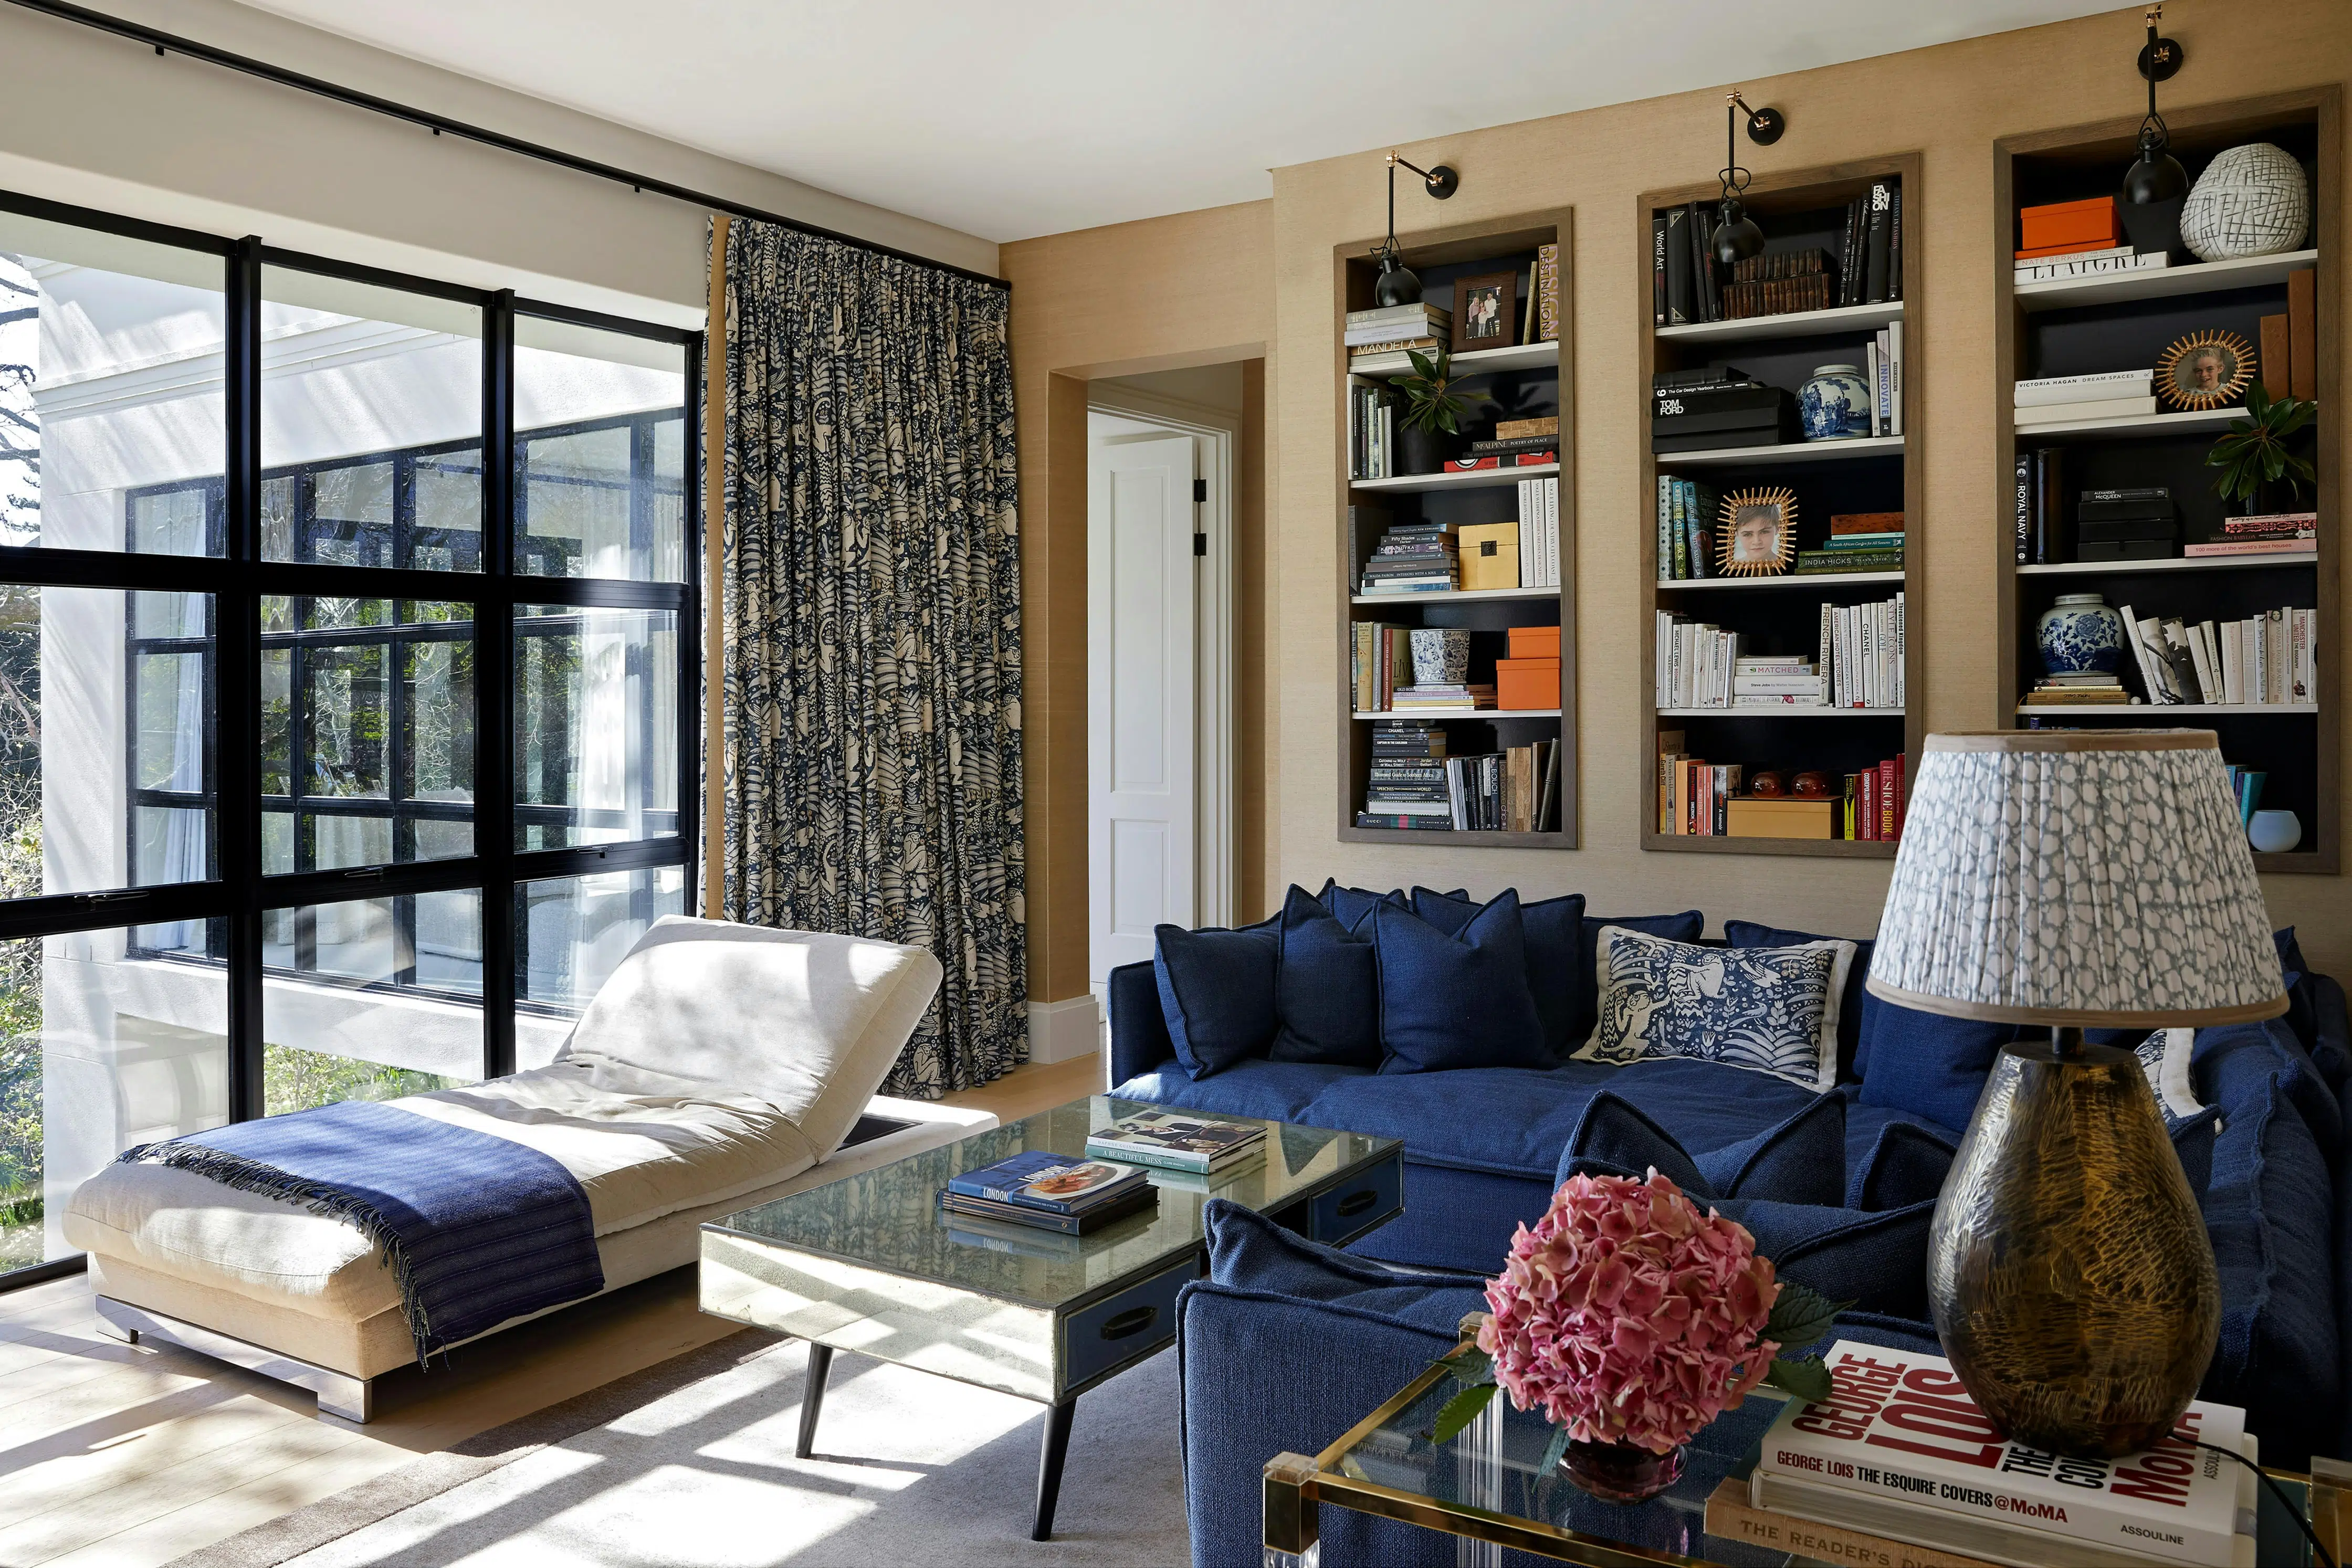 Shelving in the background that features books and decorative accents, with a daybed near large windows on the left, a coffee table in the middle and a blue sofa to the right.